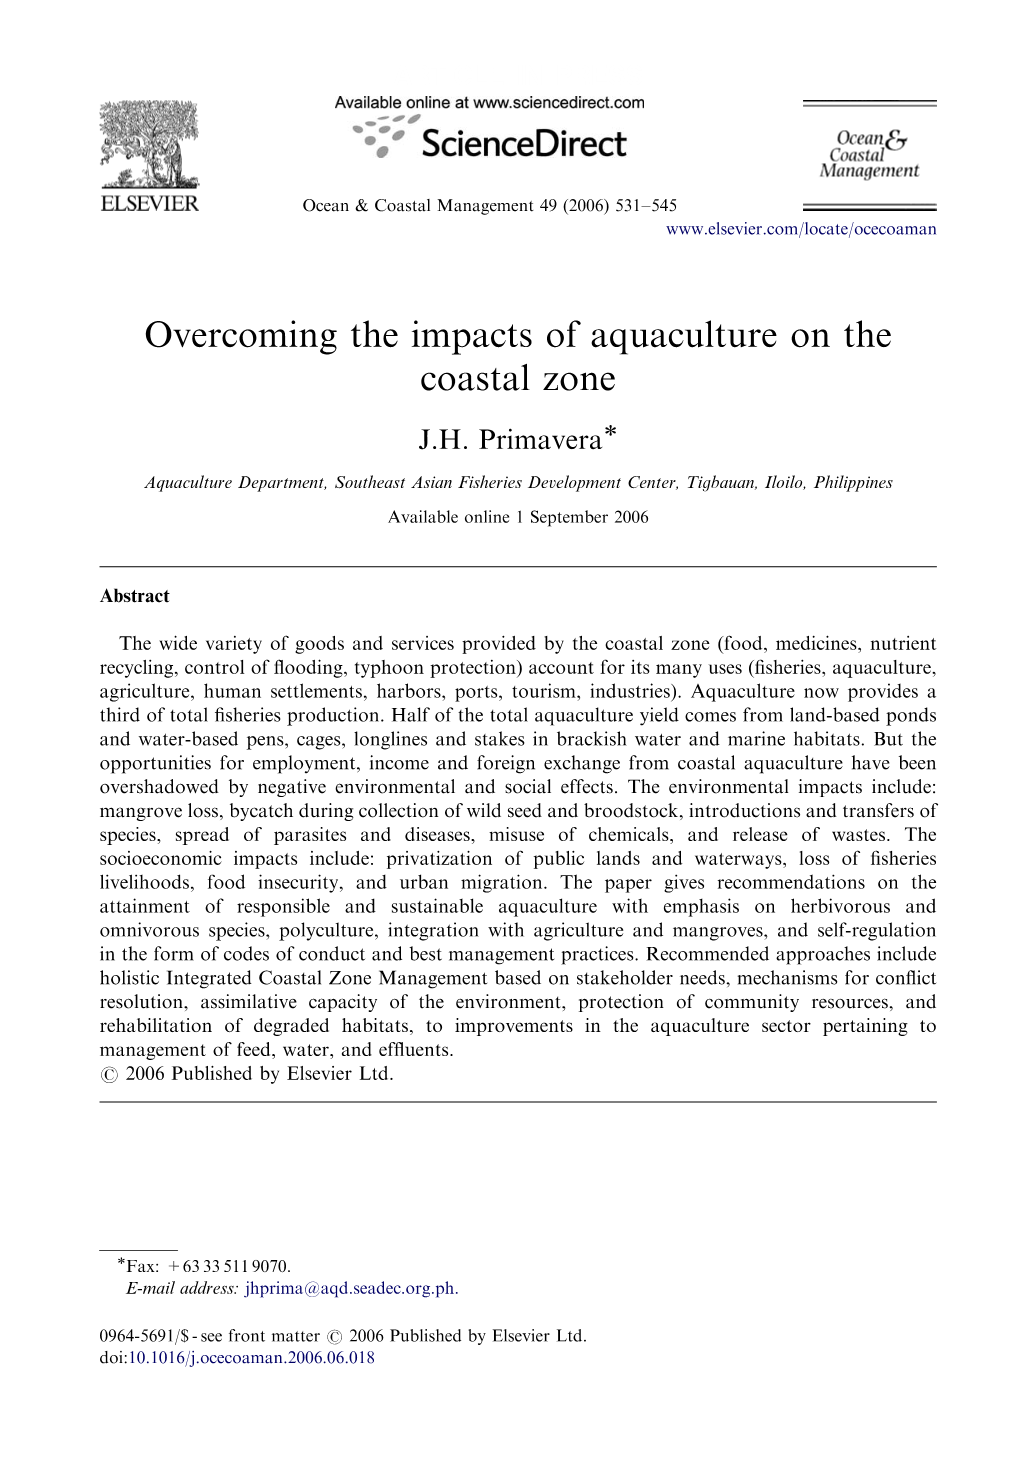 Overcoming the Impacts of Aquaculture on the Coastal Zone